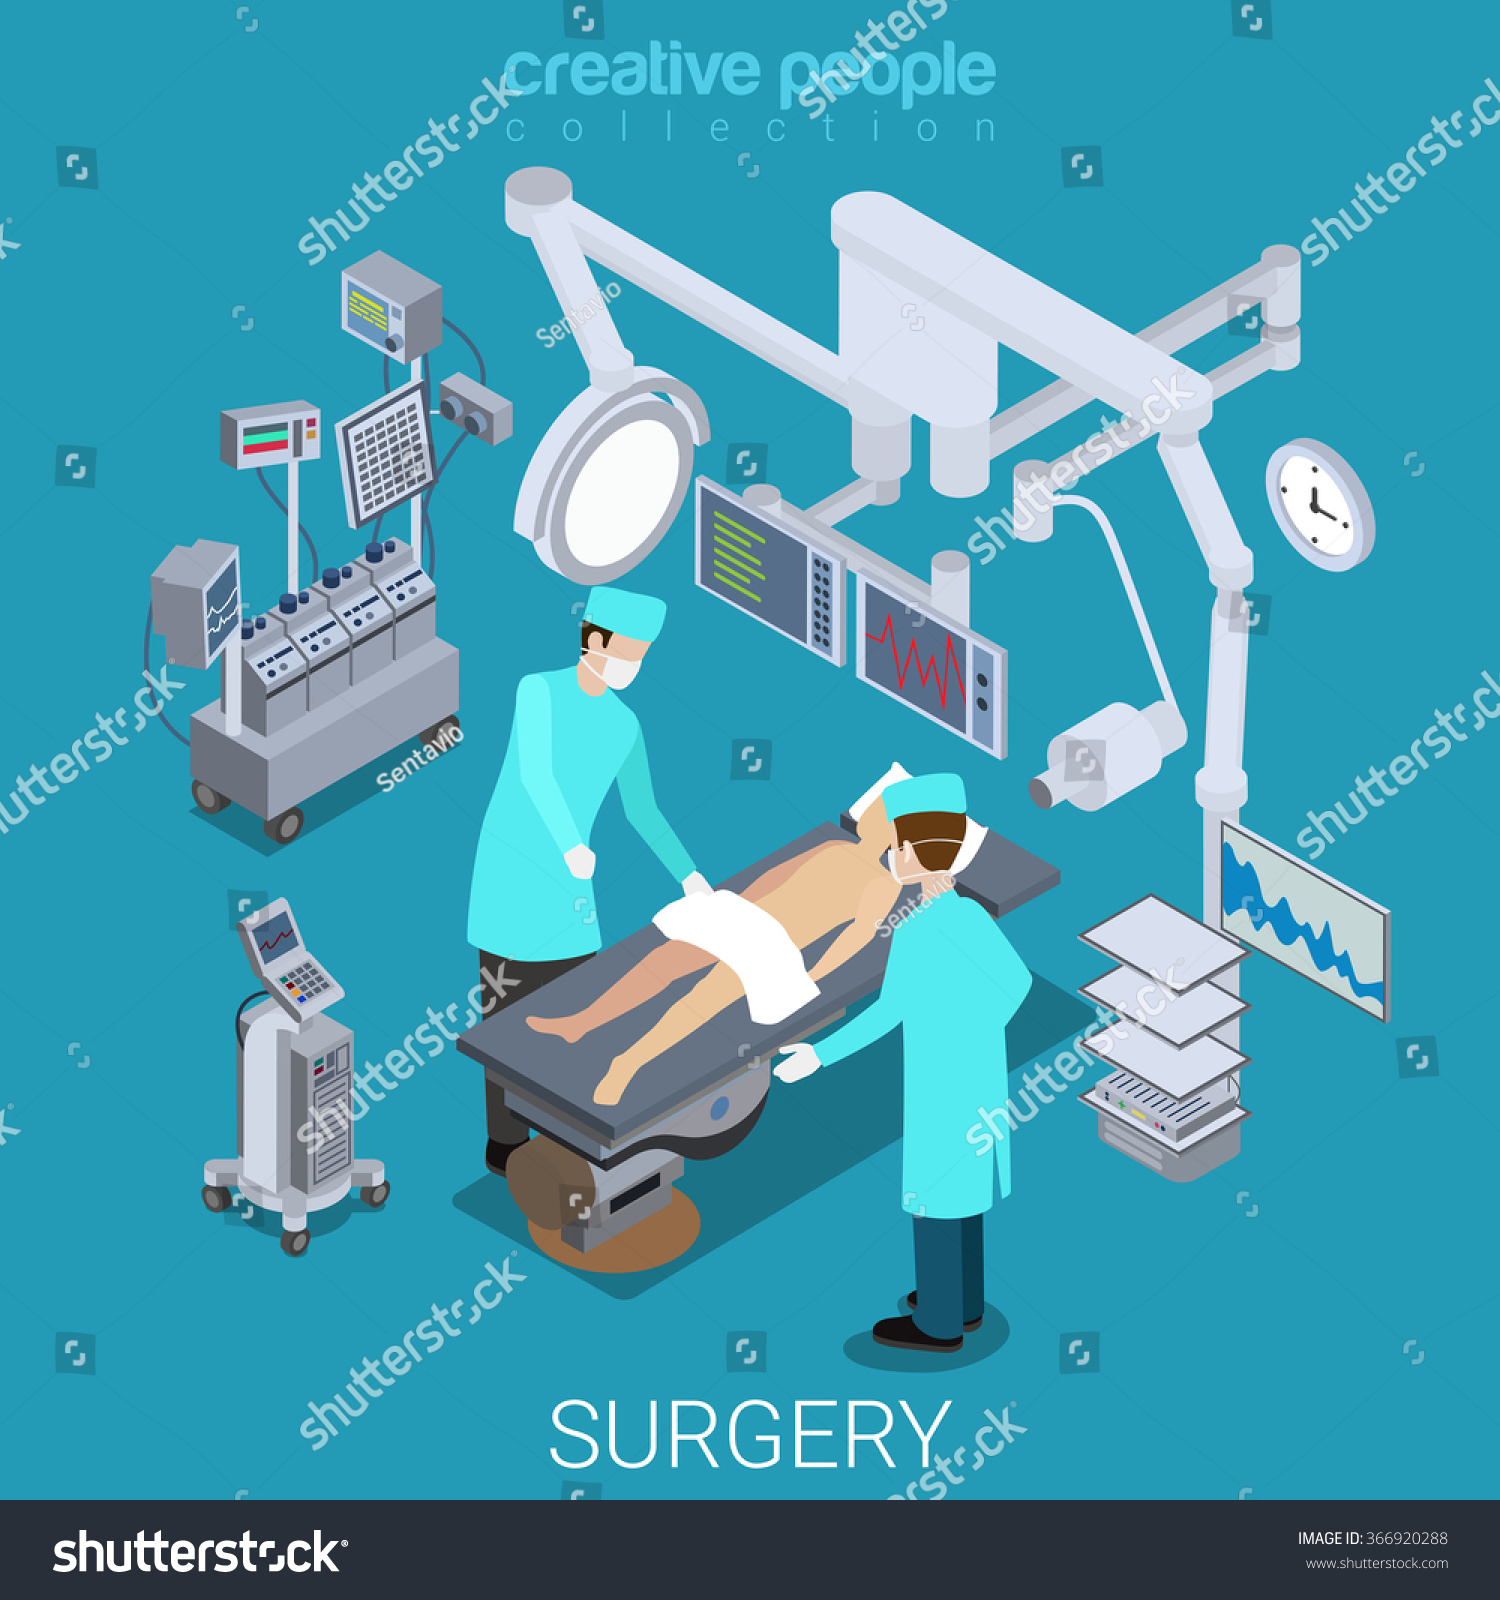 operating room clipart - photo #12